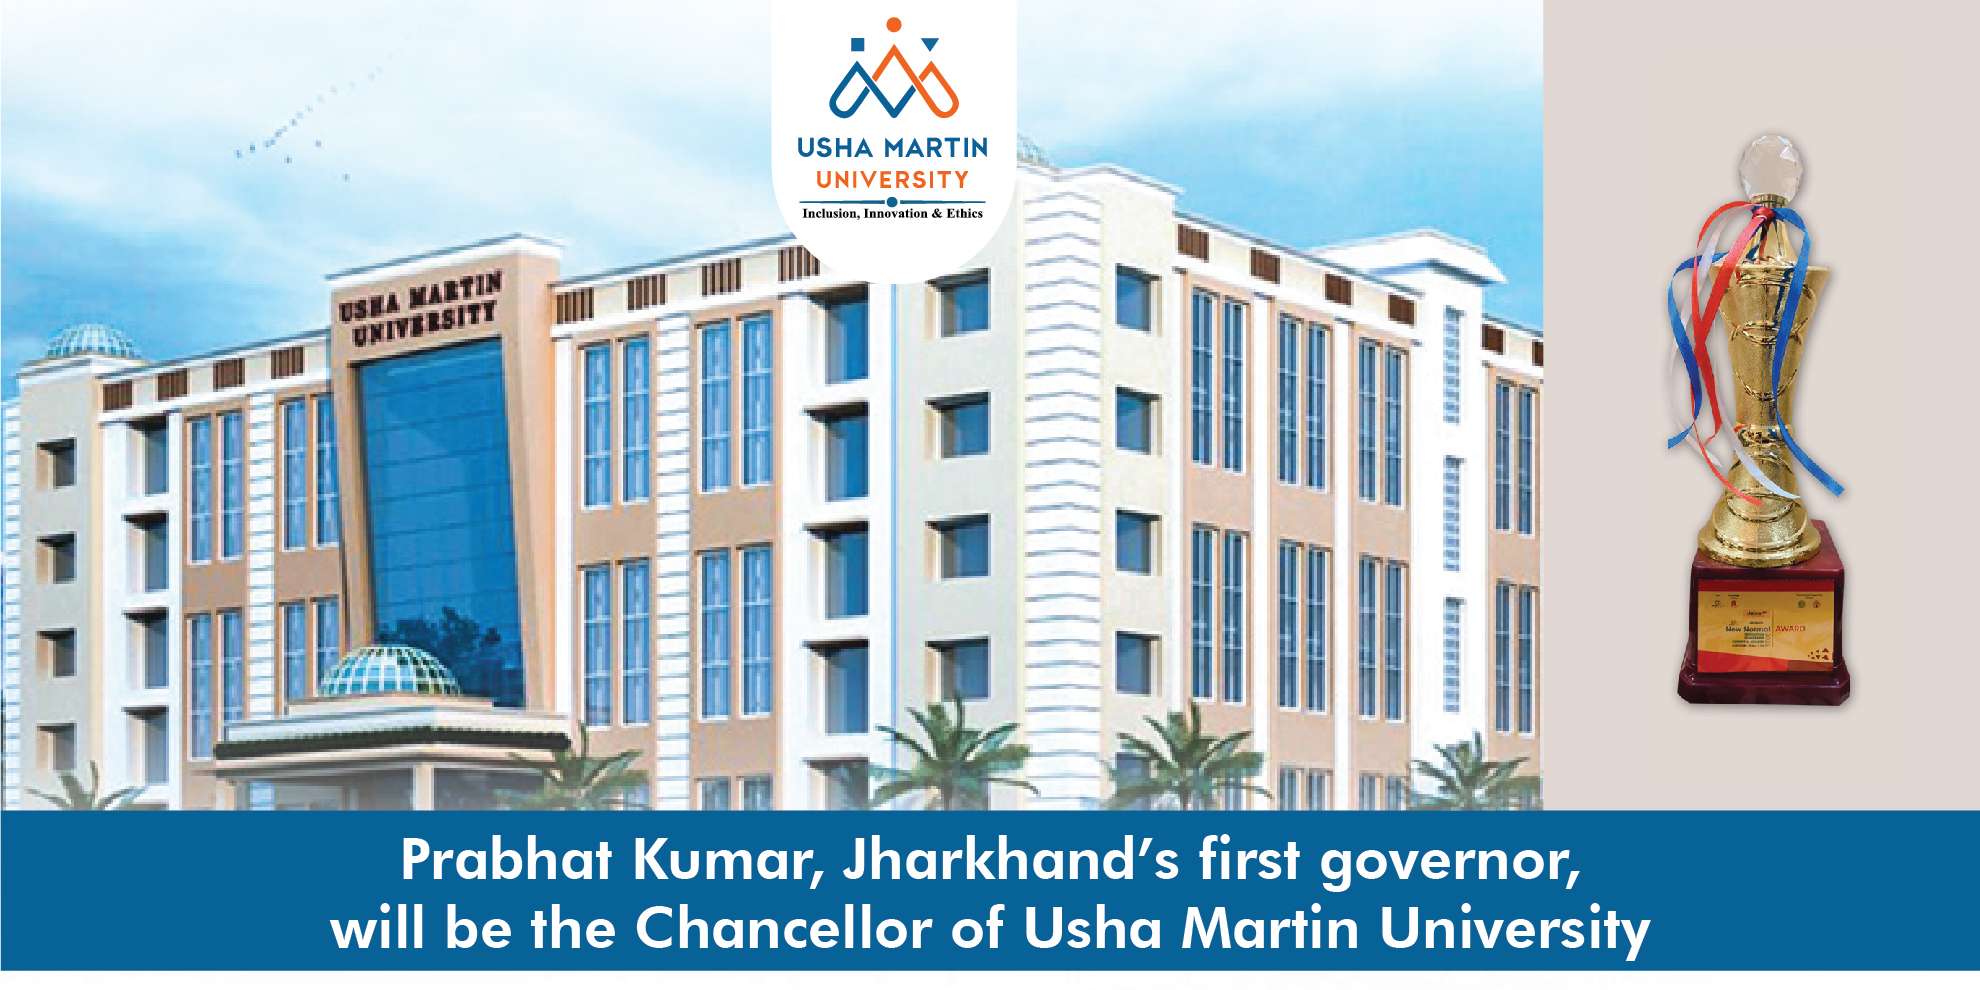 Prabhat Kumar, Jharkhand’s first governor, will be the Chancellor of Usha Martin University